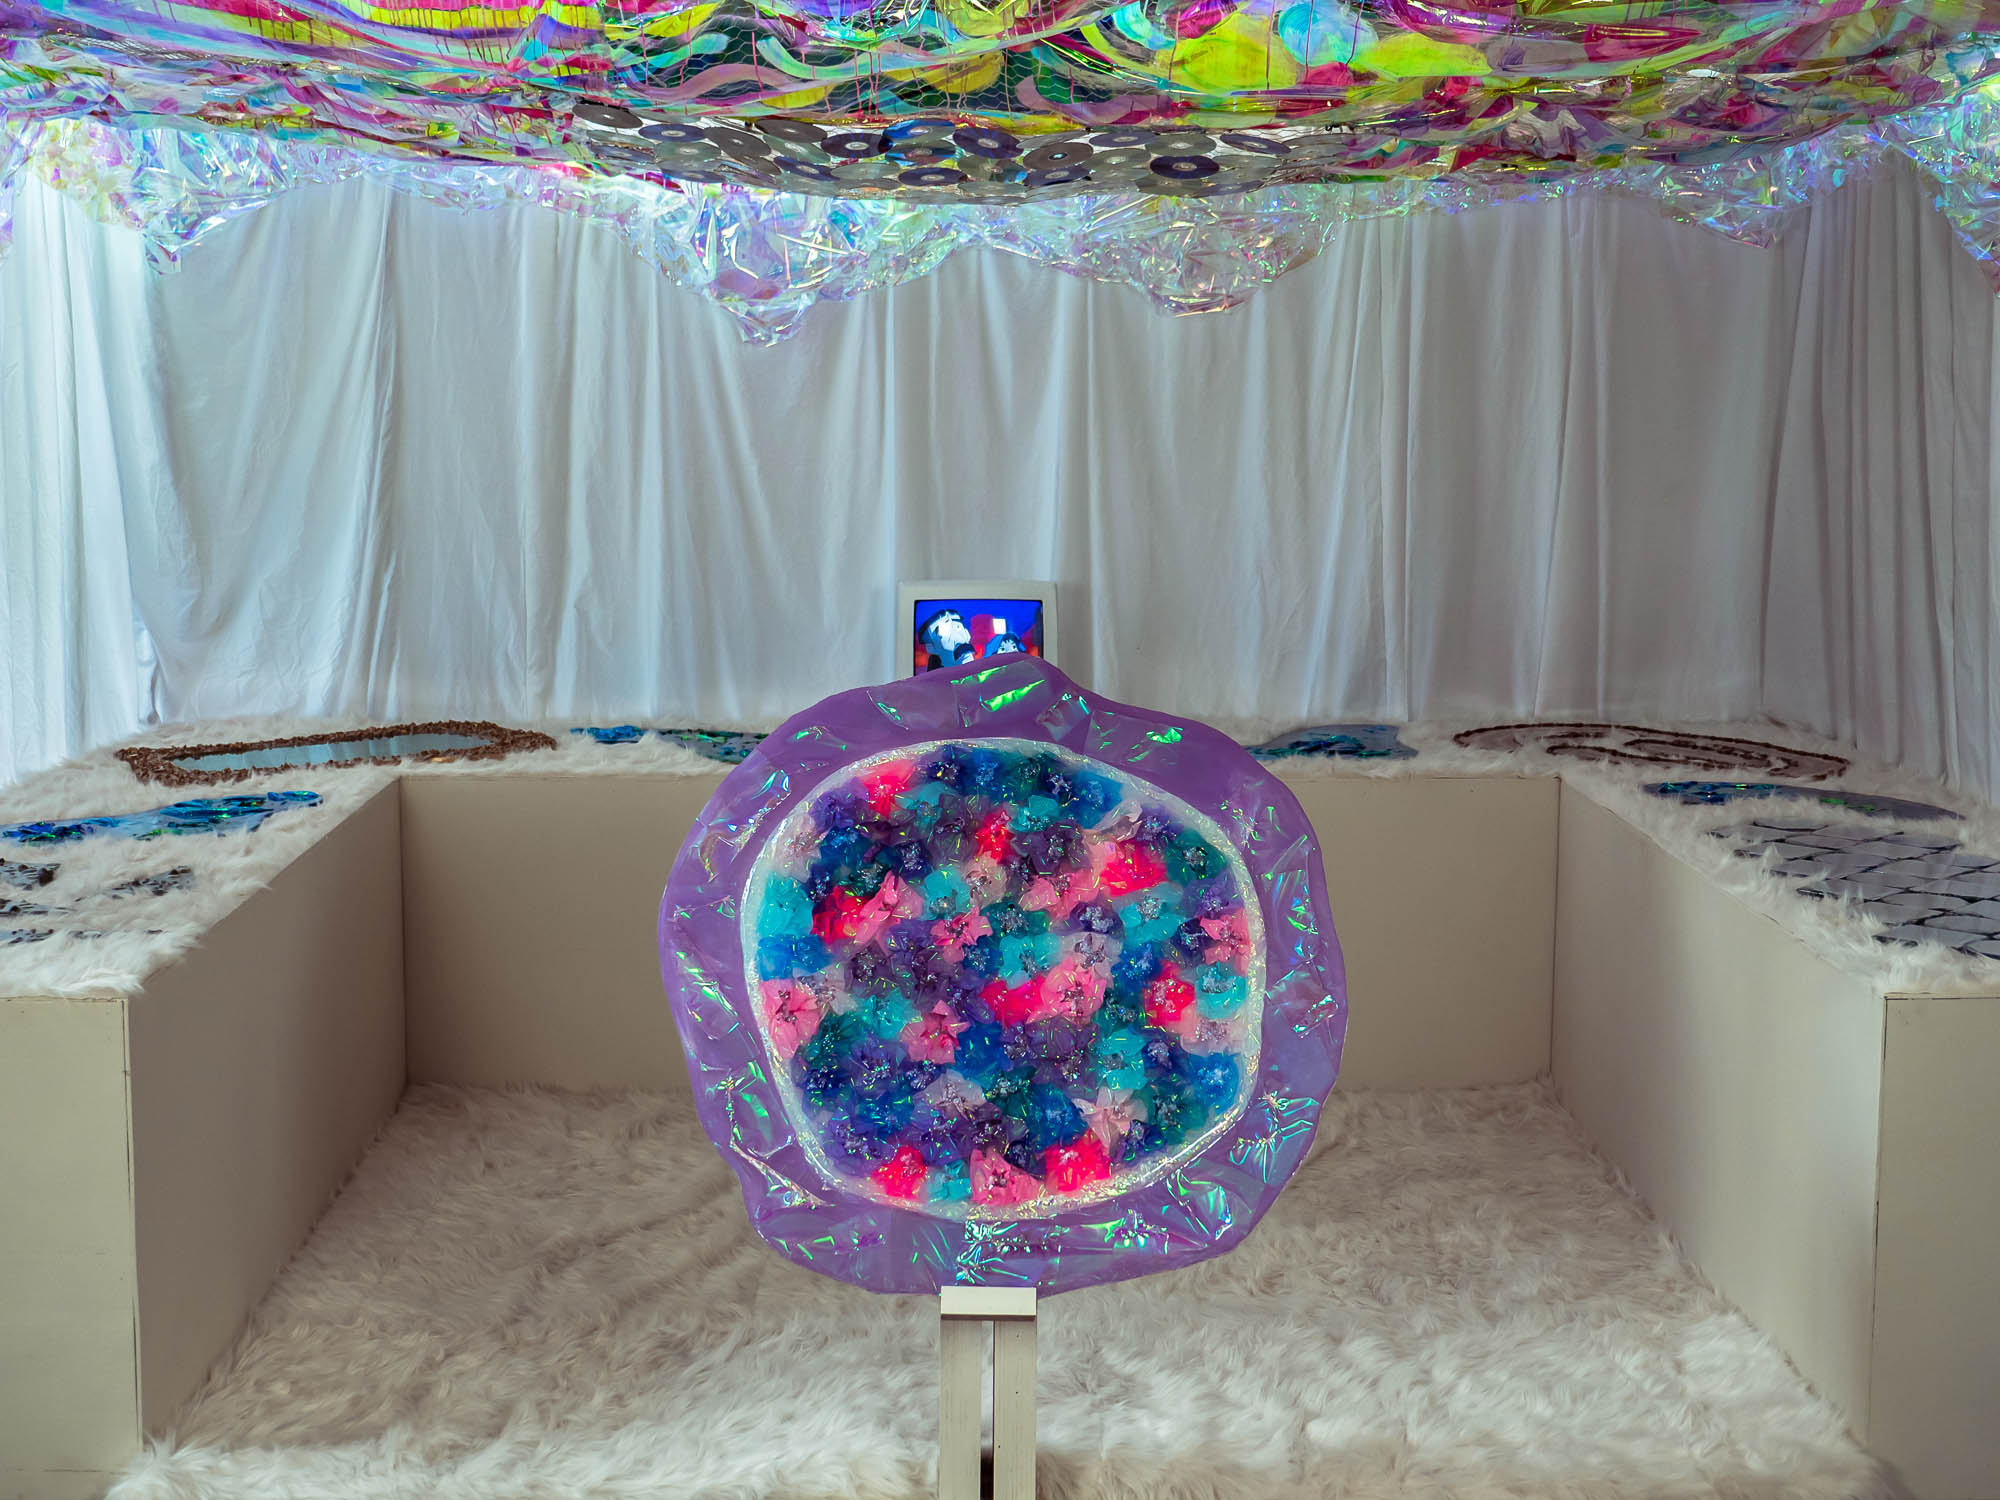 The Soul Pod is pictured, set up as it would be for exhibition. The pieces are astrologically laid out on the tables orbiting the Mystic centerpiece. The room is completely illuminated, inviting everyone to come and explore. 